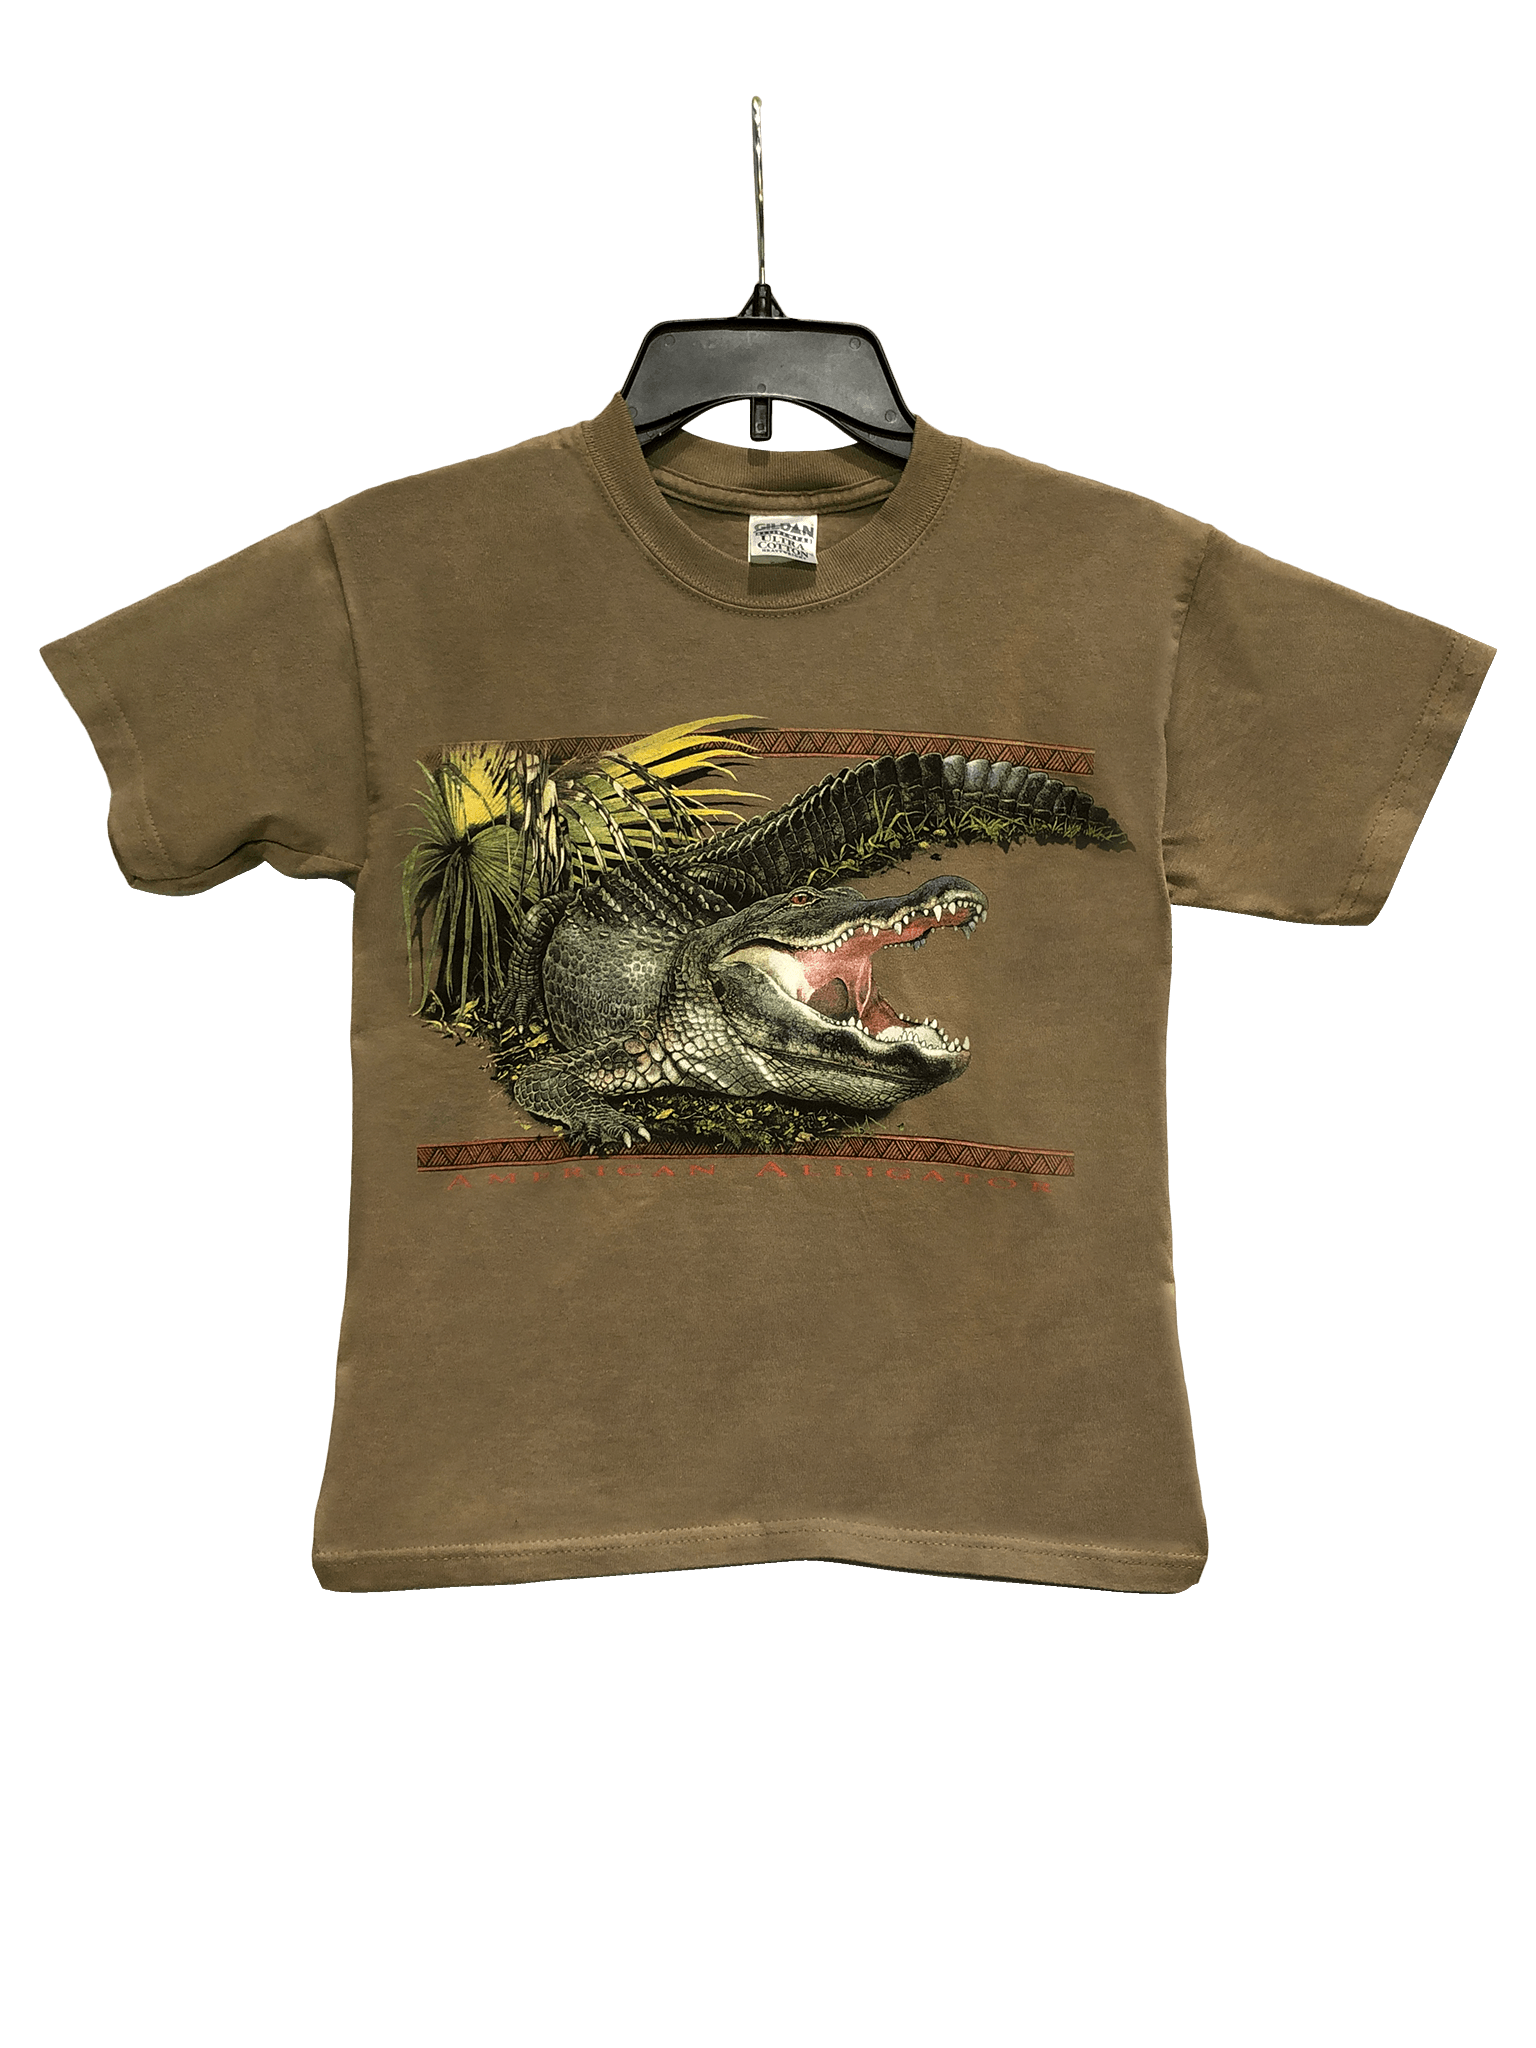 American Alligator T-Shirt (Youth) - Only a few shirts of this great design remain available. Order now! Kids love this shirt!